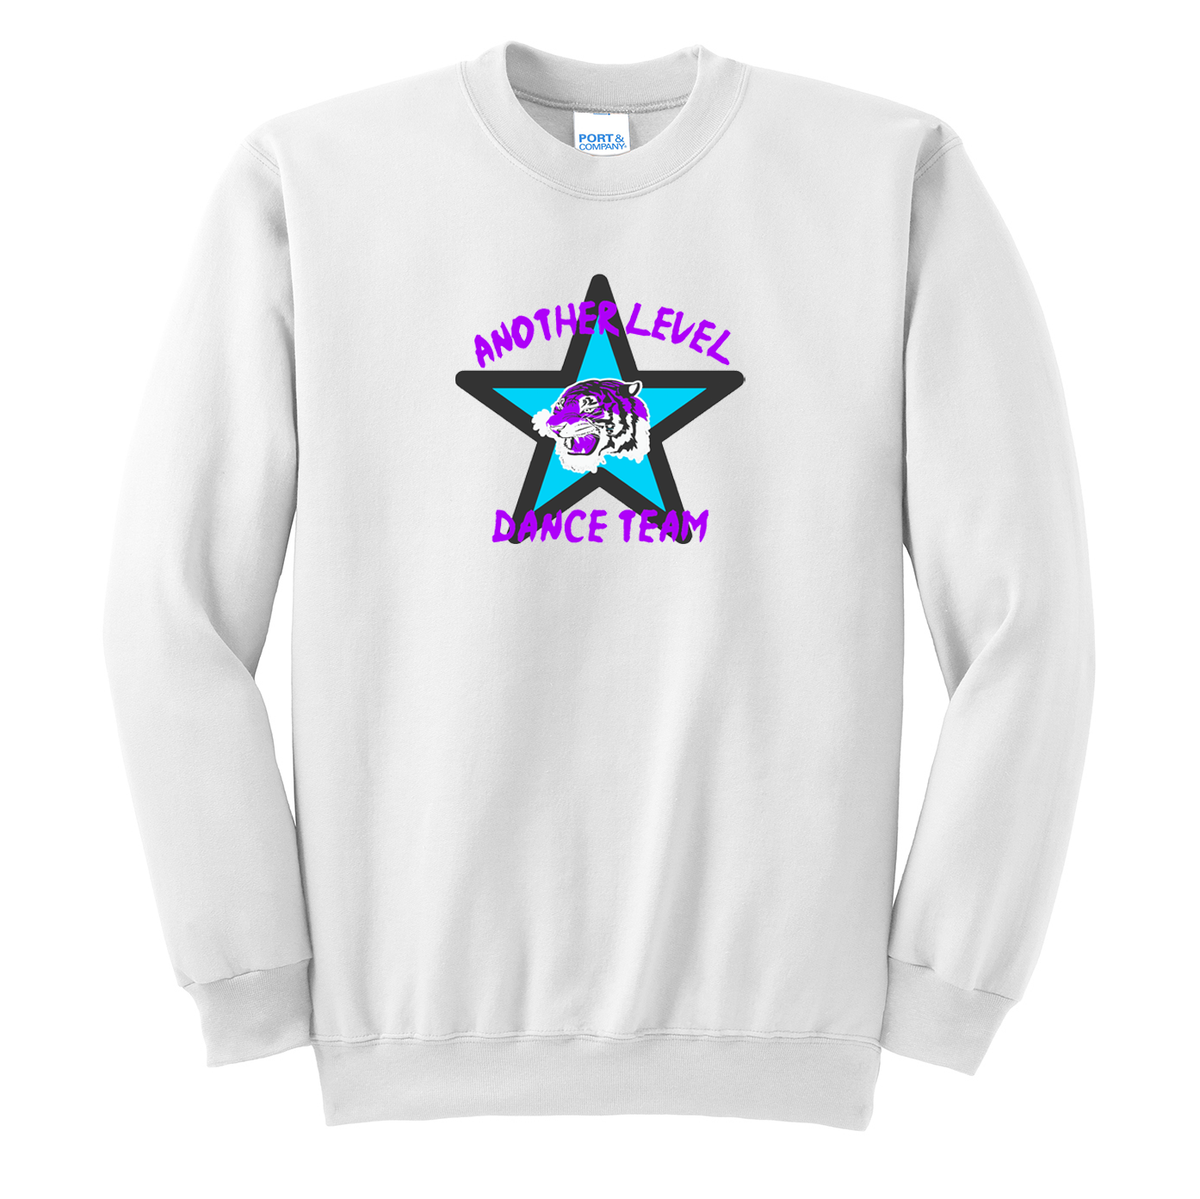 Another Level Dance Team Crew Neck Sweater